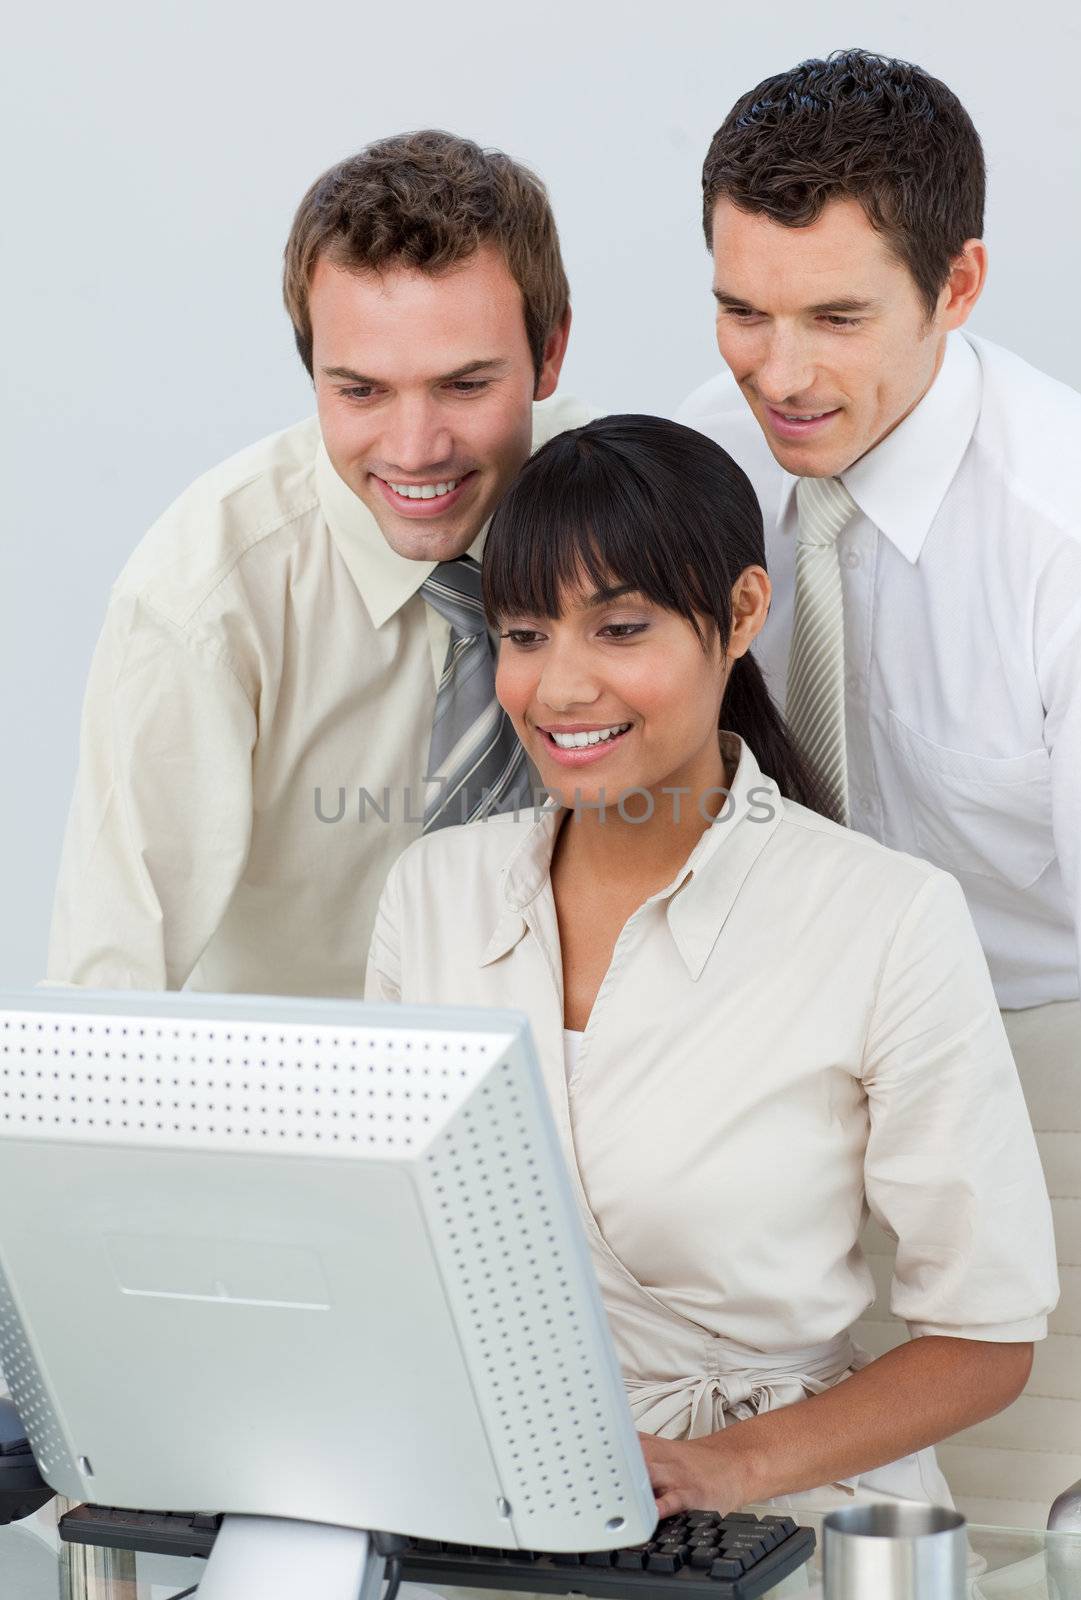 Businessmen and ethnic businesswoman working with a computer in an office